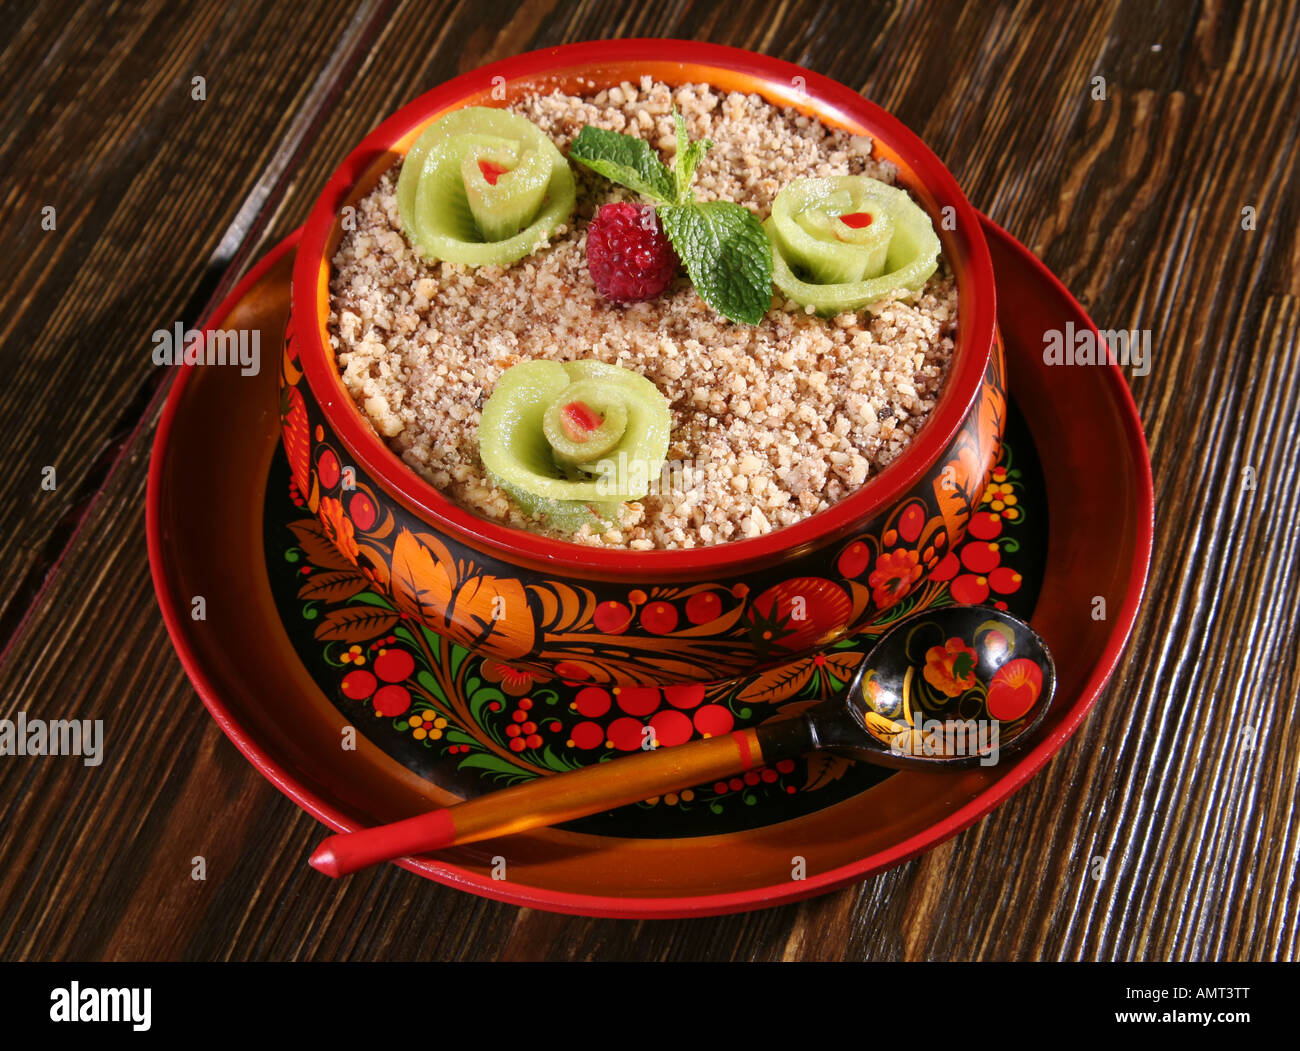 Cereal buckwheat and fruit in russian national dish Stock Photo